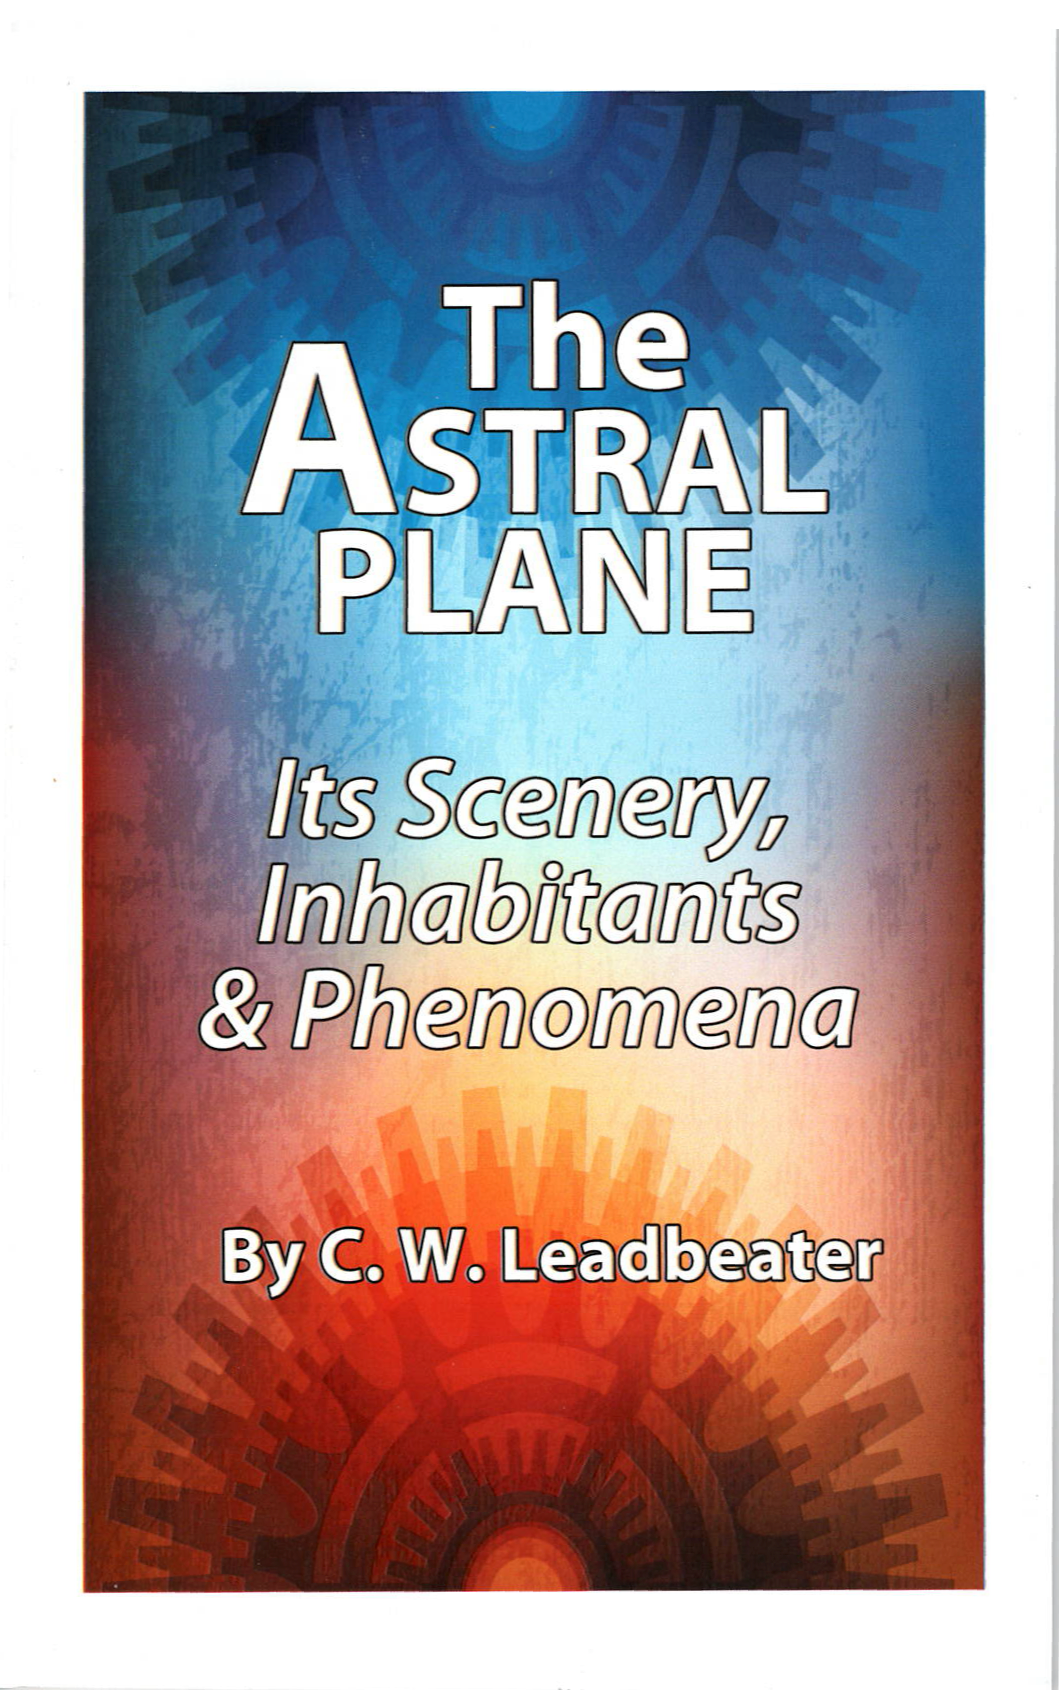 The Astral Plane, by C. W. Leadbeater